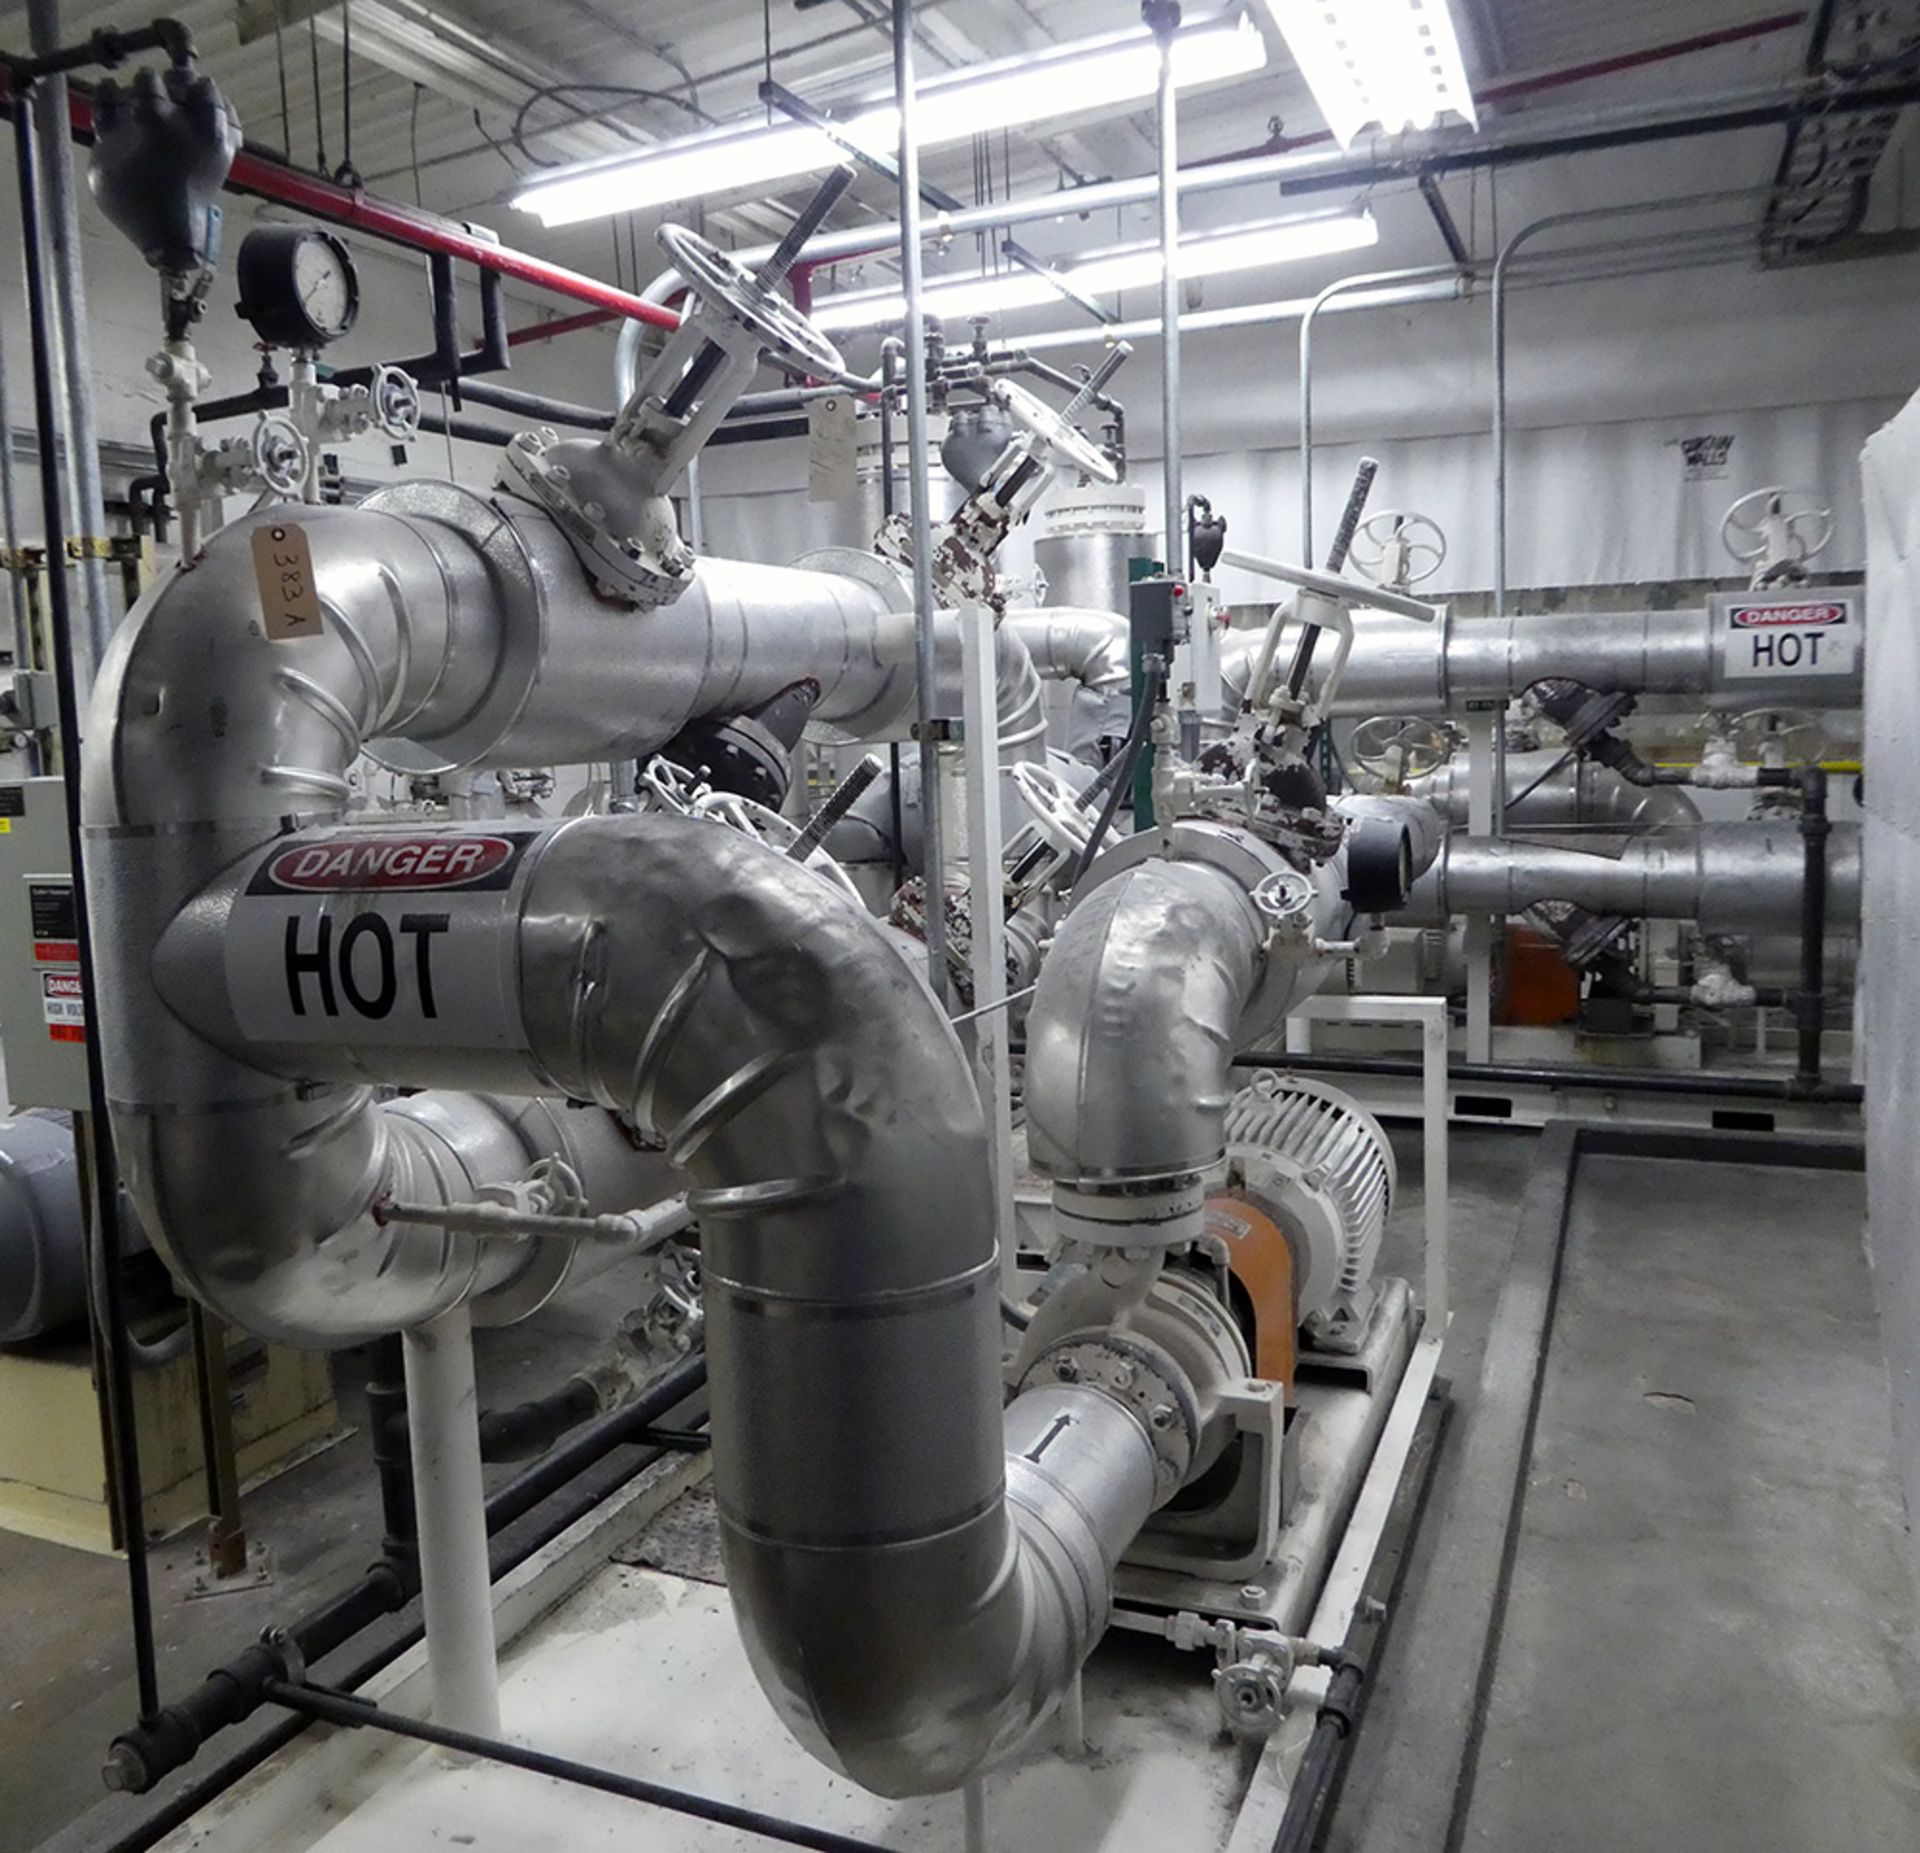 Heat Exchange And Transfer (H.E.A.T.) Hot Oil System - Image 2 of 20